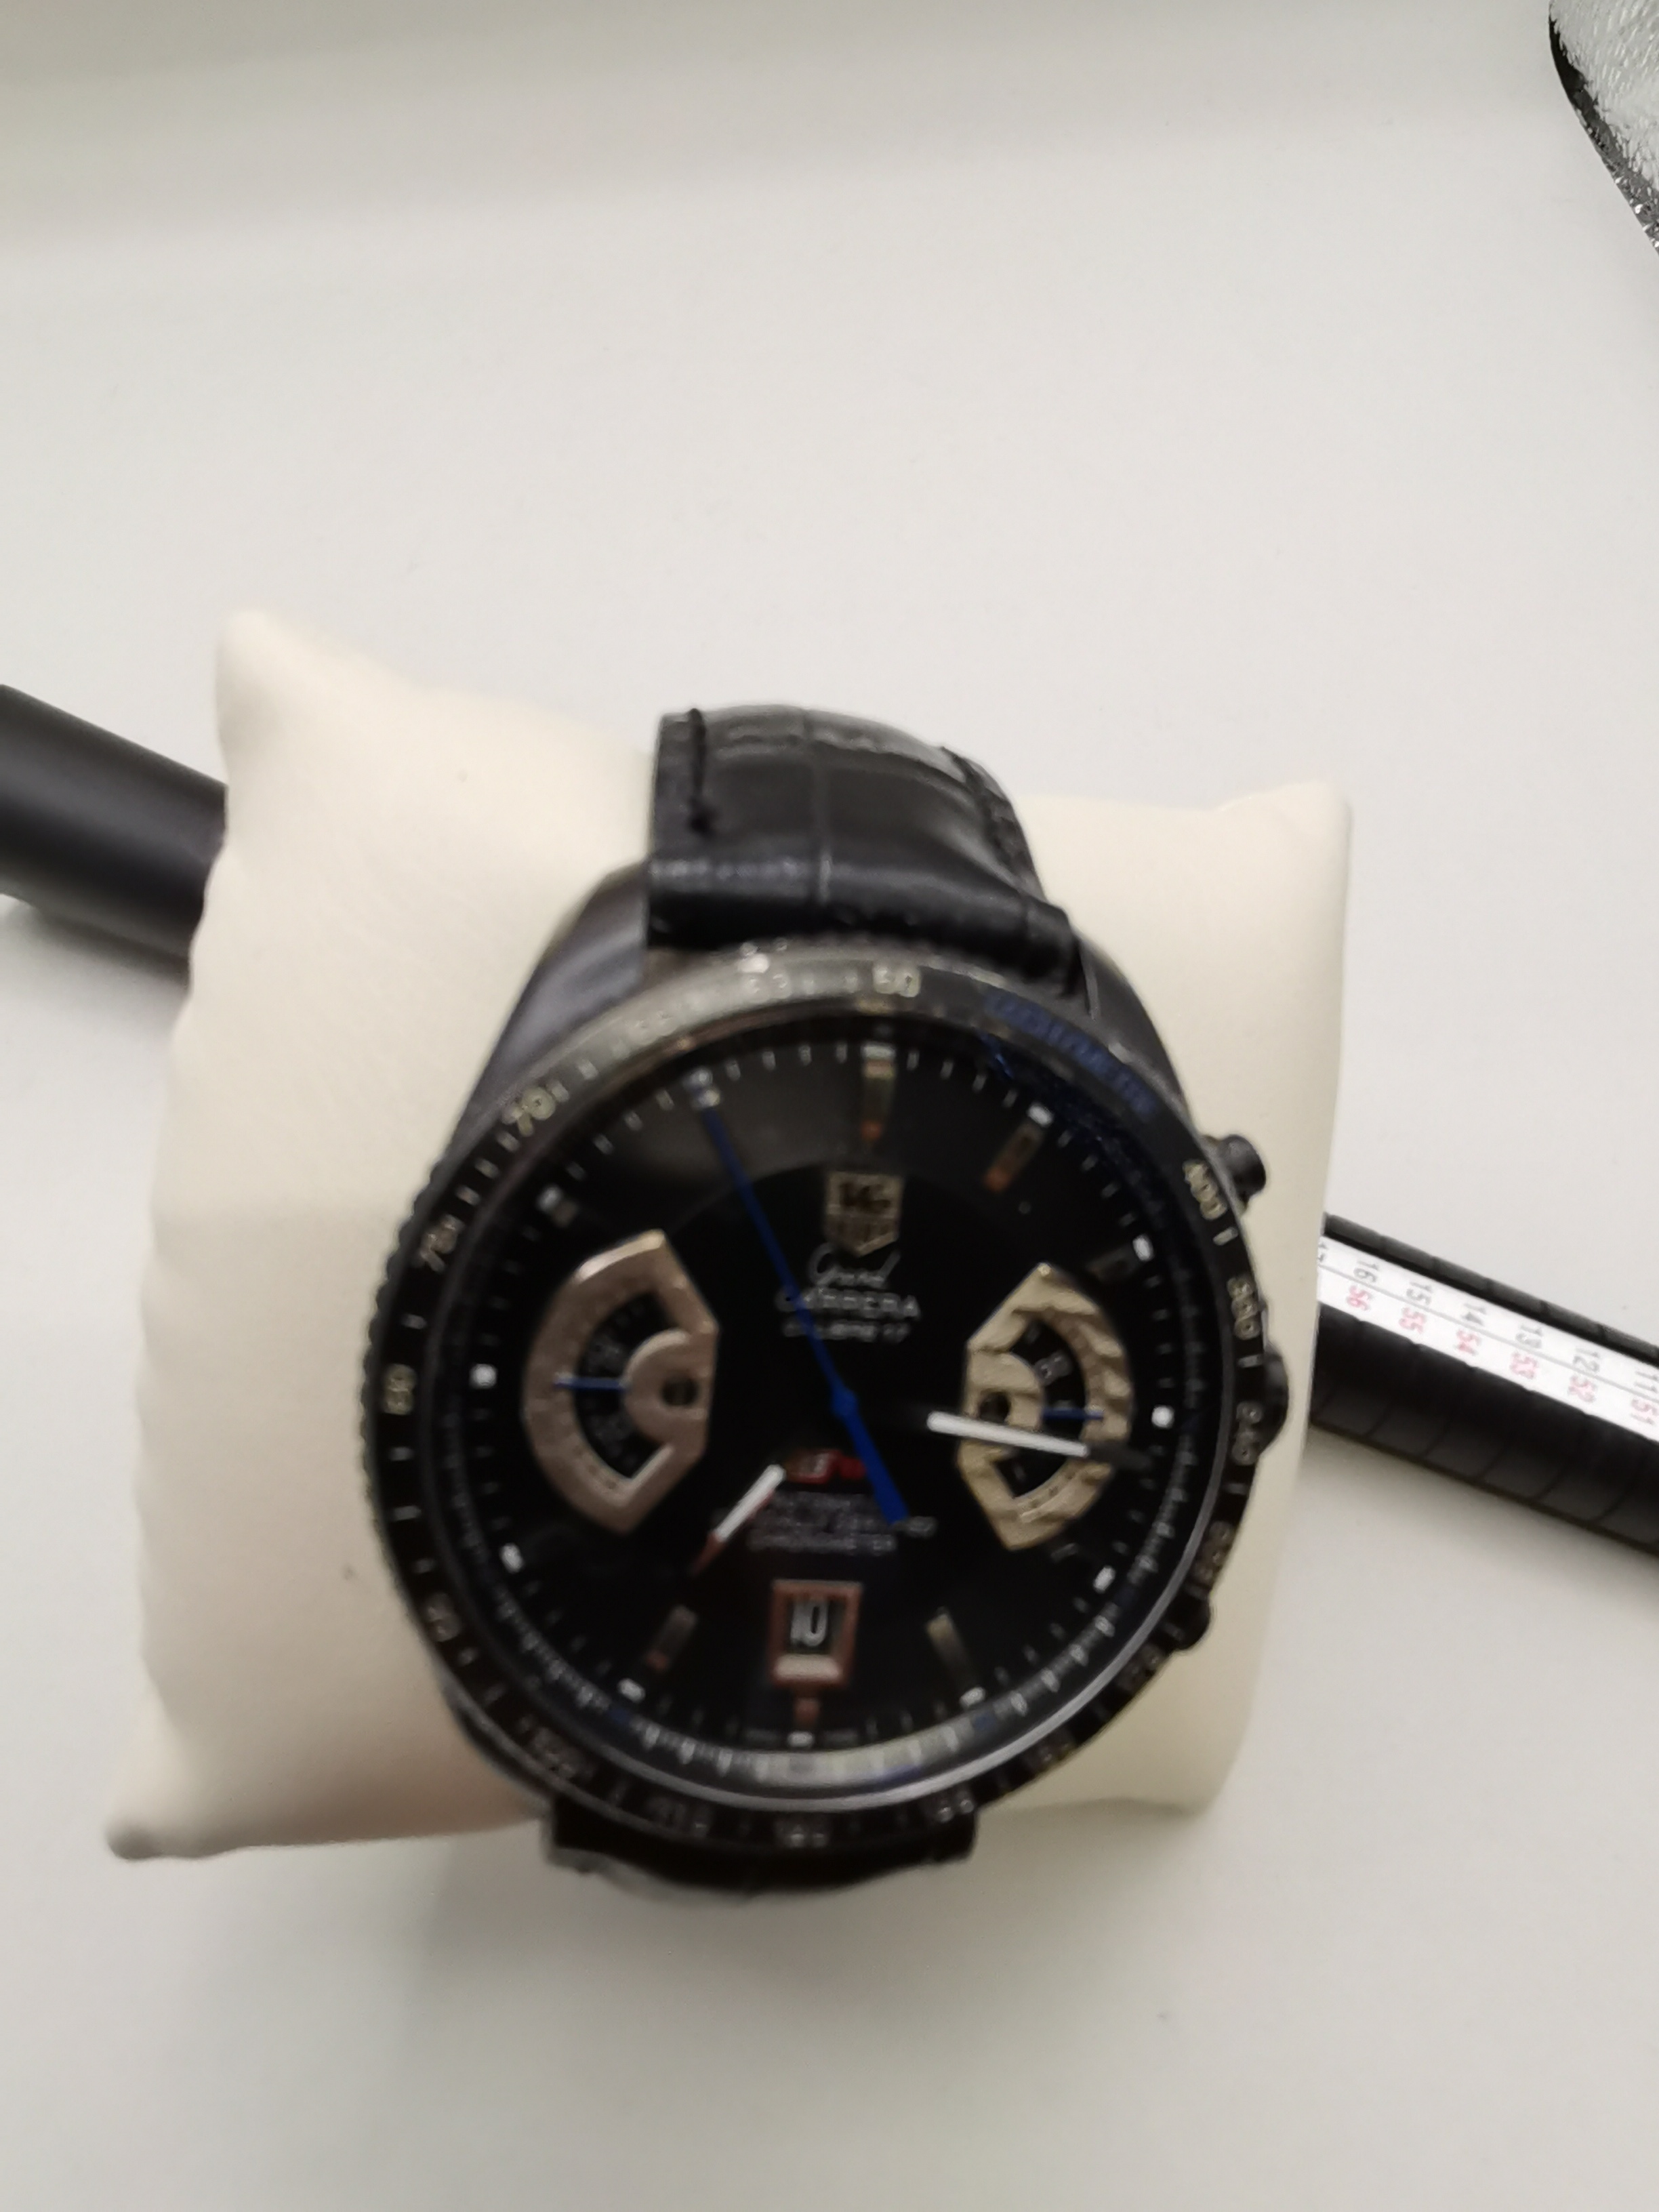 TAG Heuer Grand Carrera Calibre 17 Automatic wrist watch. - Image 4 of 6